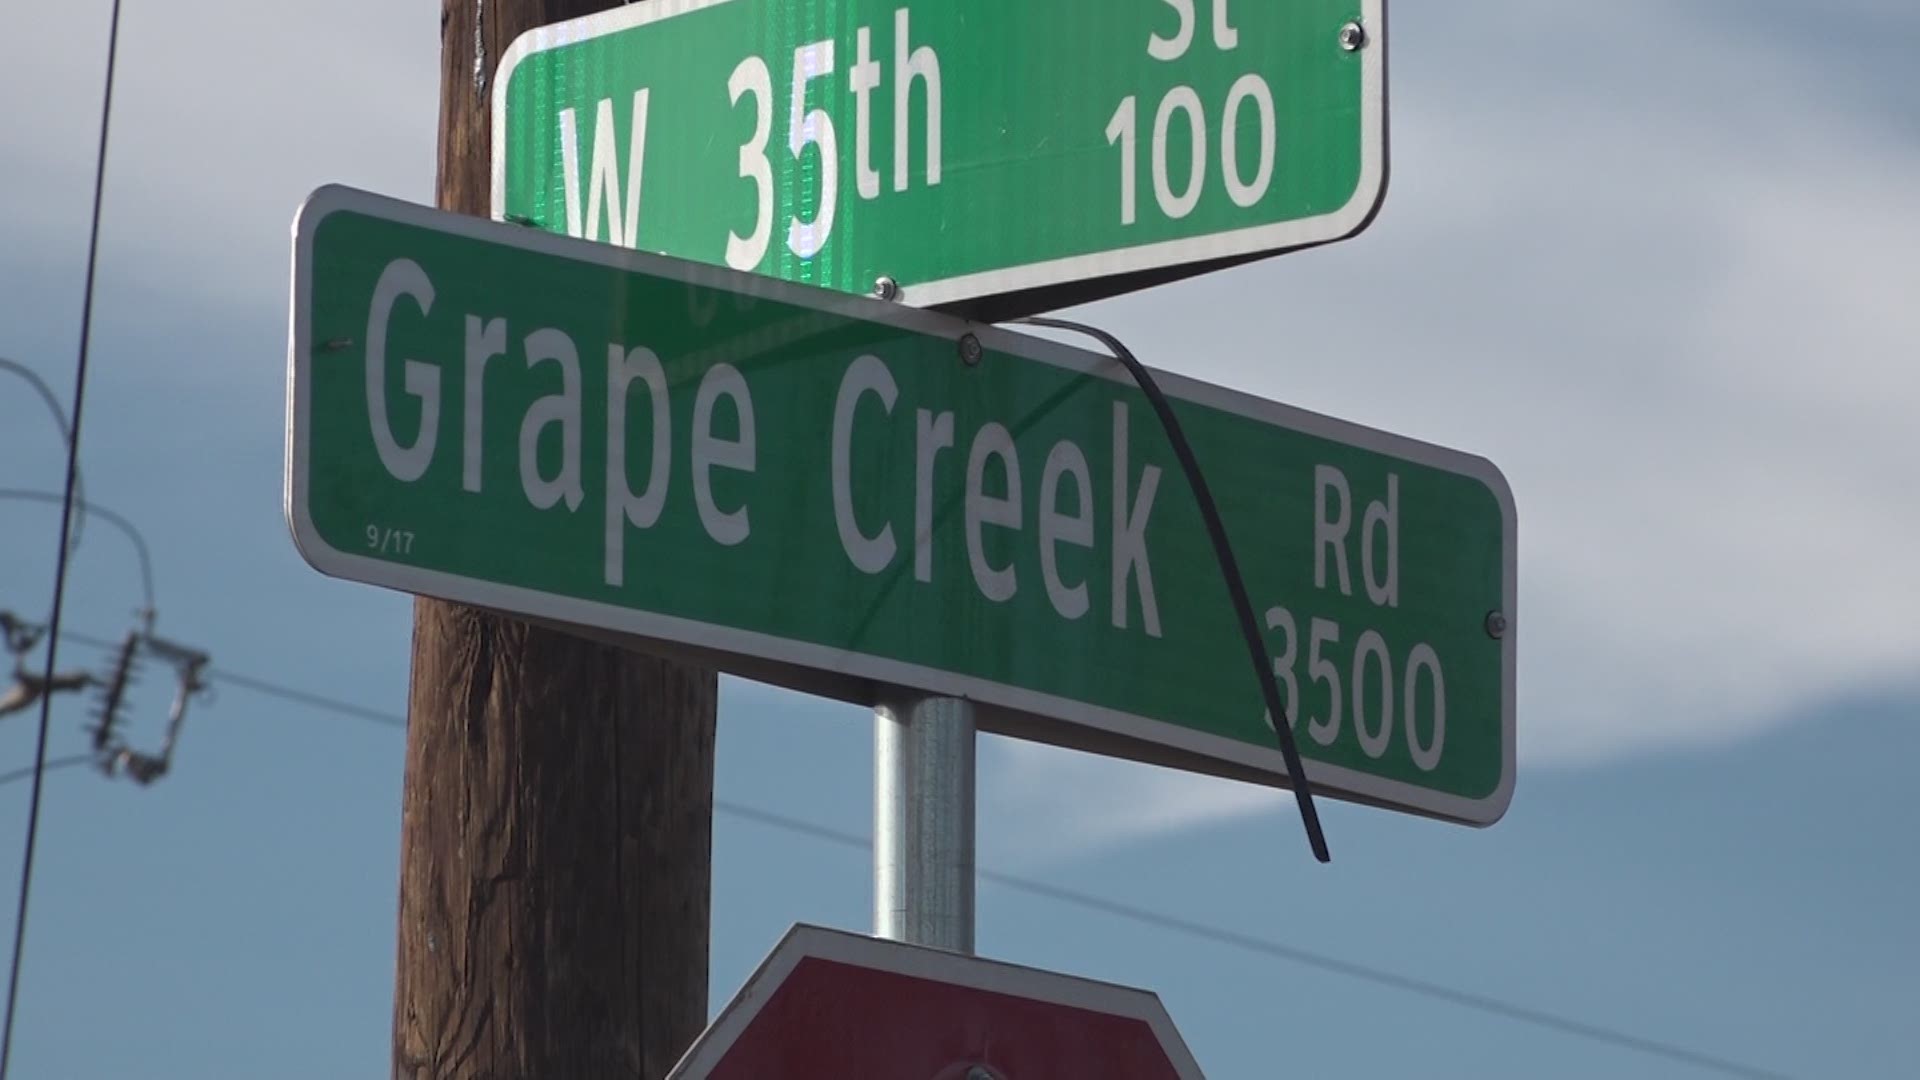 Officers were dispatched on a report of a shooting victim Sunday afternoon in the 3500 block of Grape Creek Road.